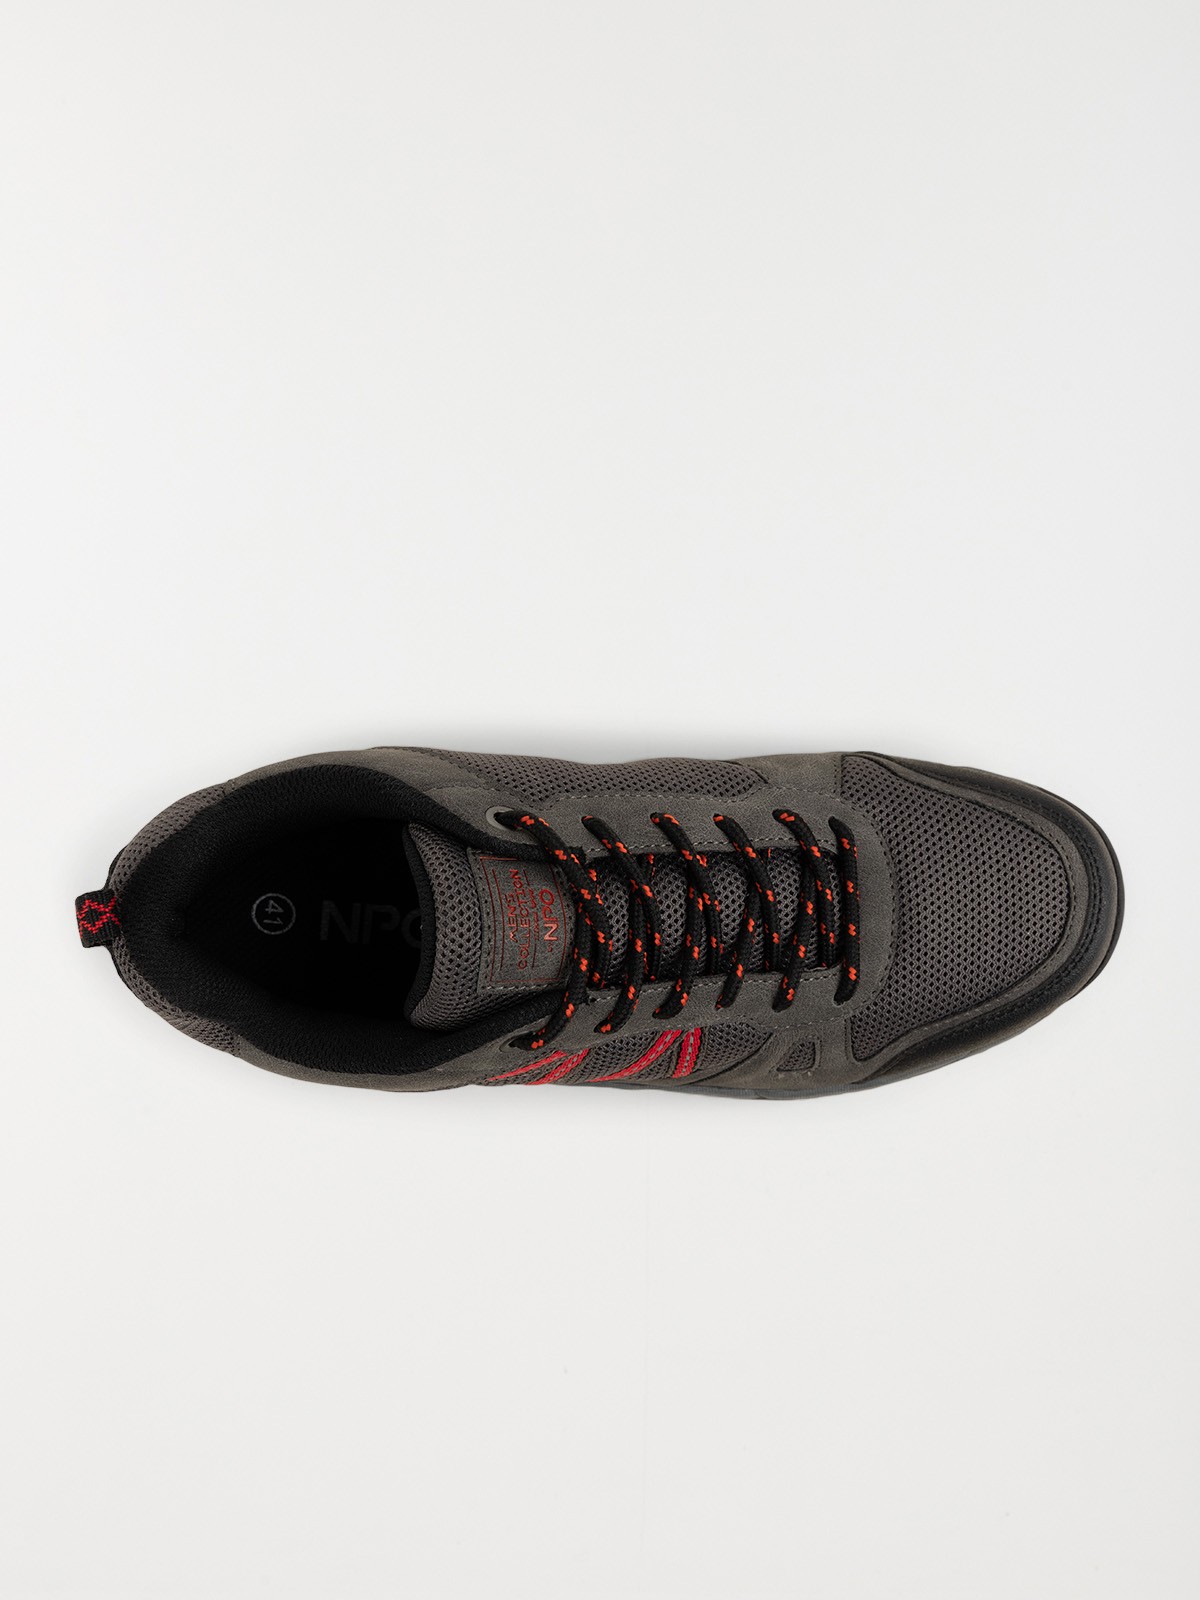 Chaussures sport homme rouge (40-45) - DistriCenter